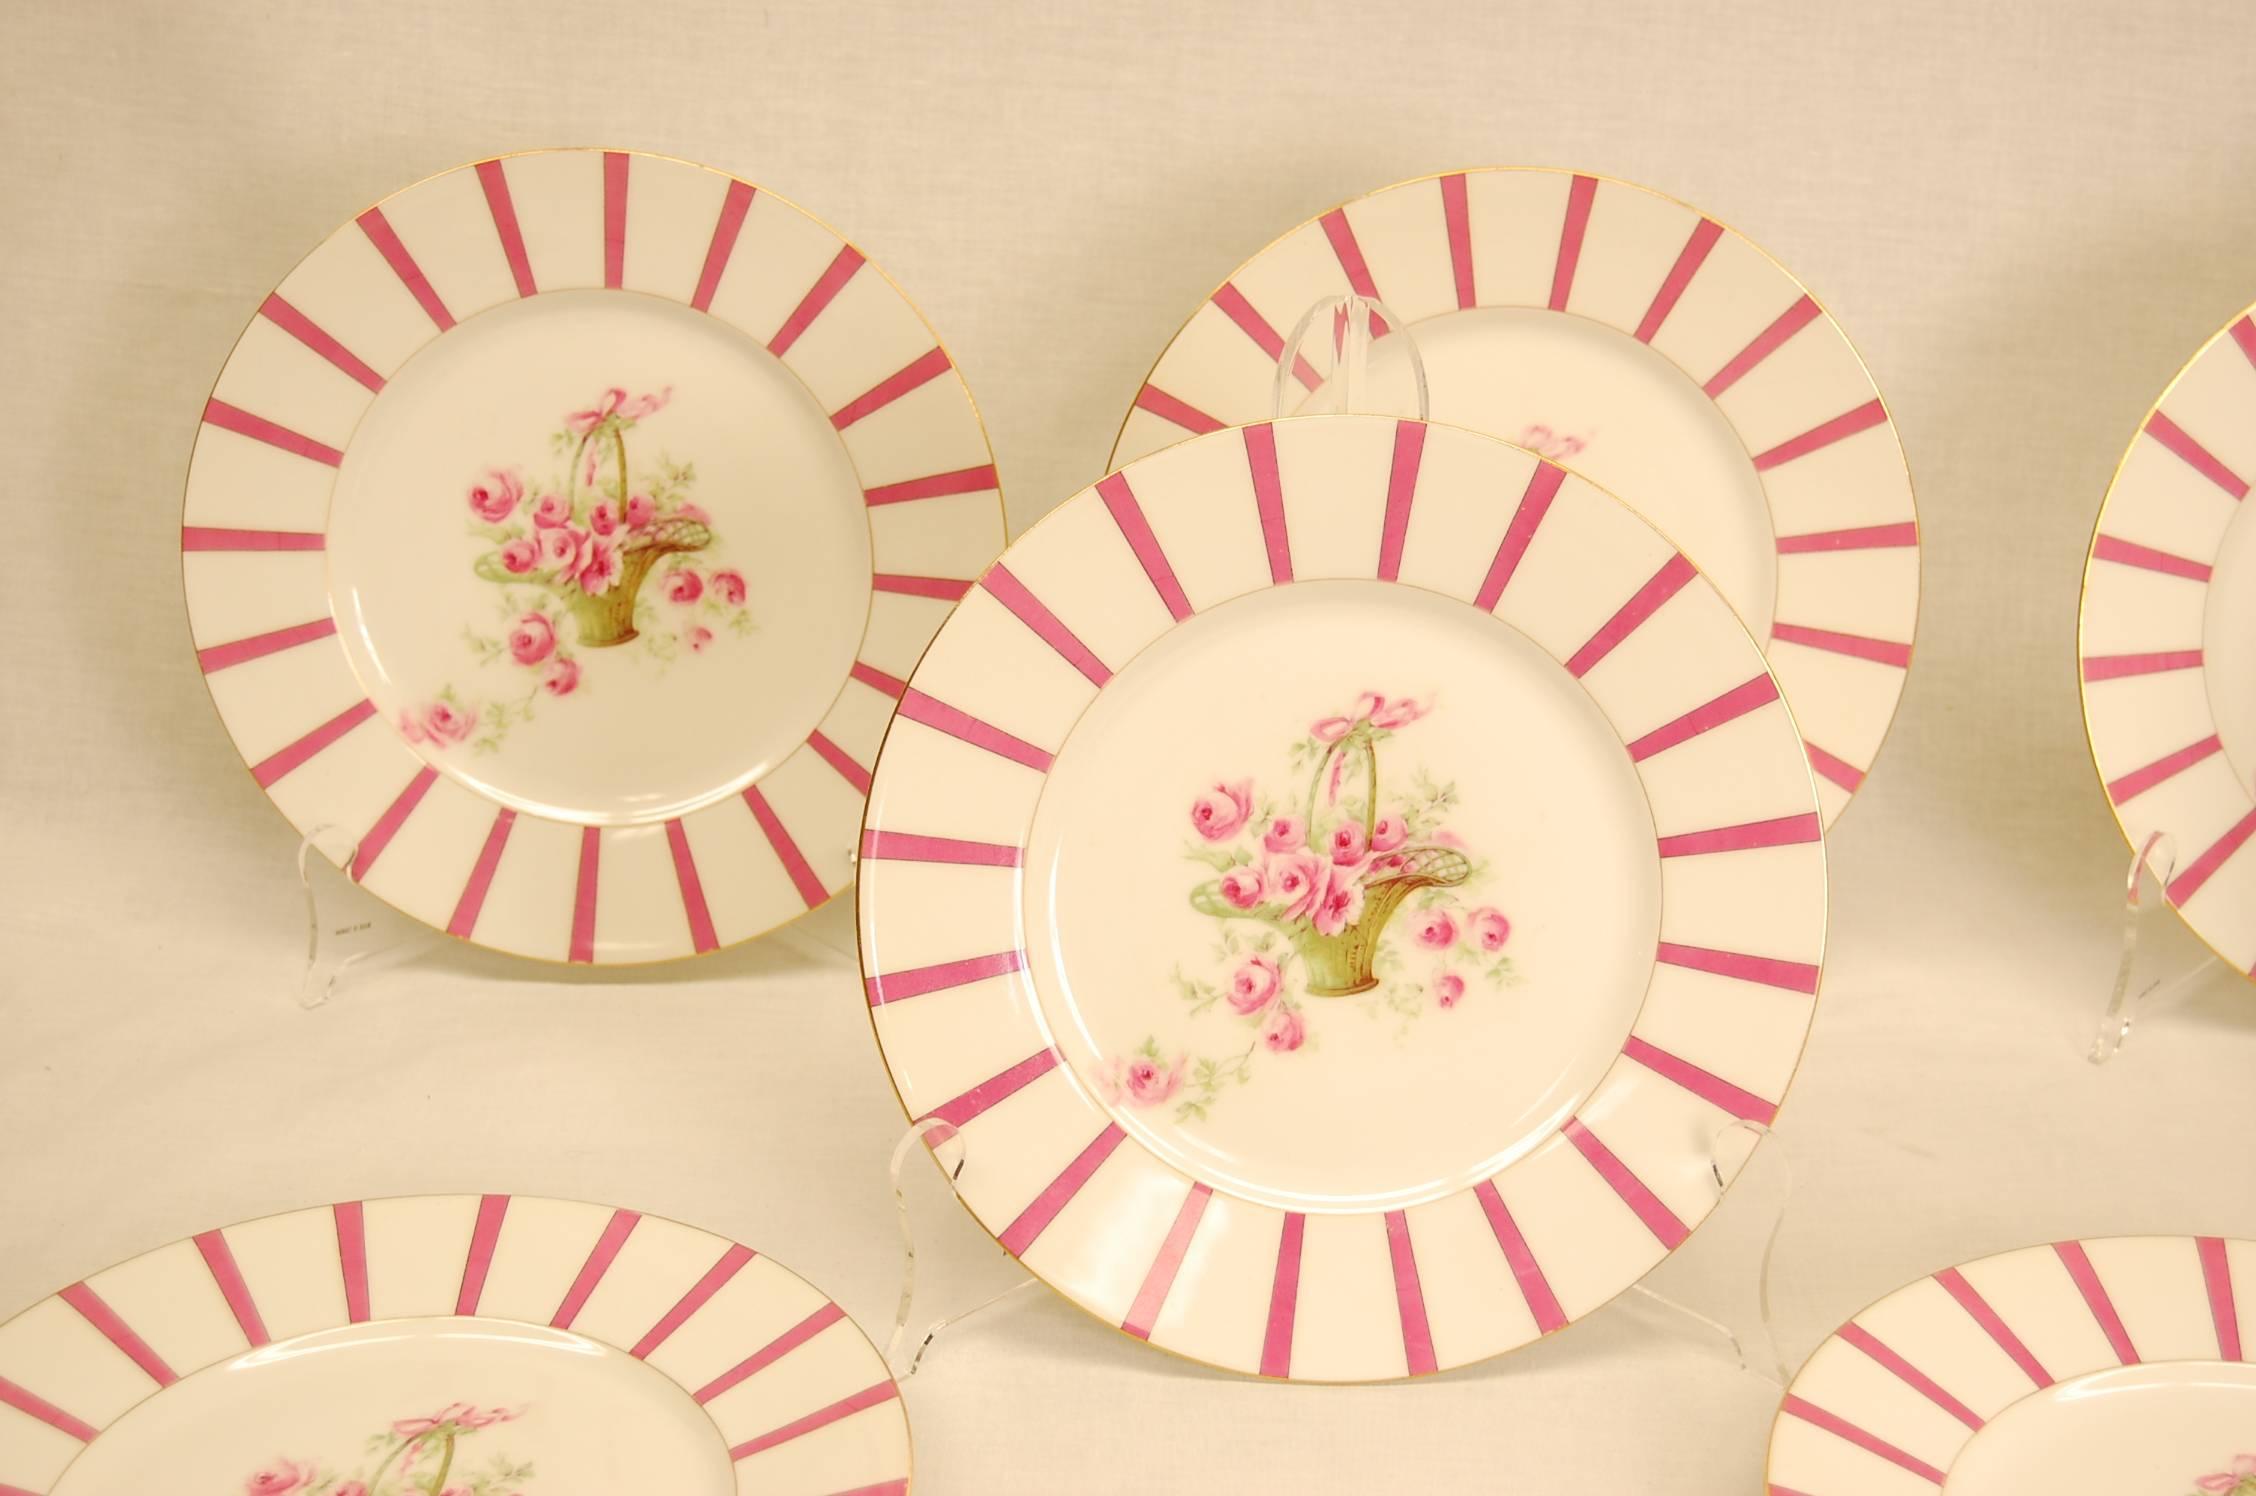 11 porcelain plates by Limoges measures 9 7/8 in diameter, all in excellent condition (one small chip as shown) each plate has a basket of flowers with pink roses and greens.